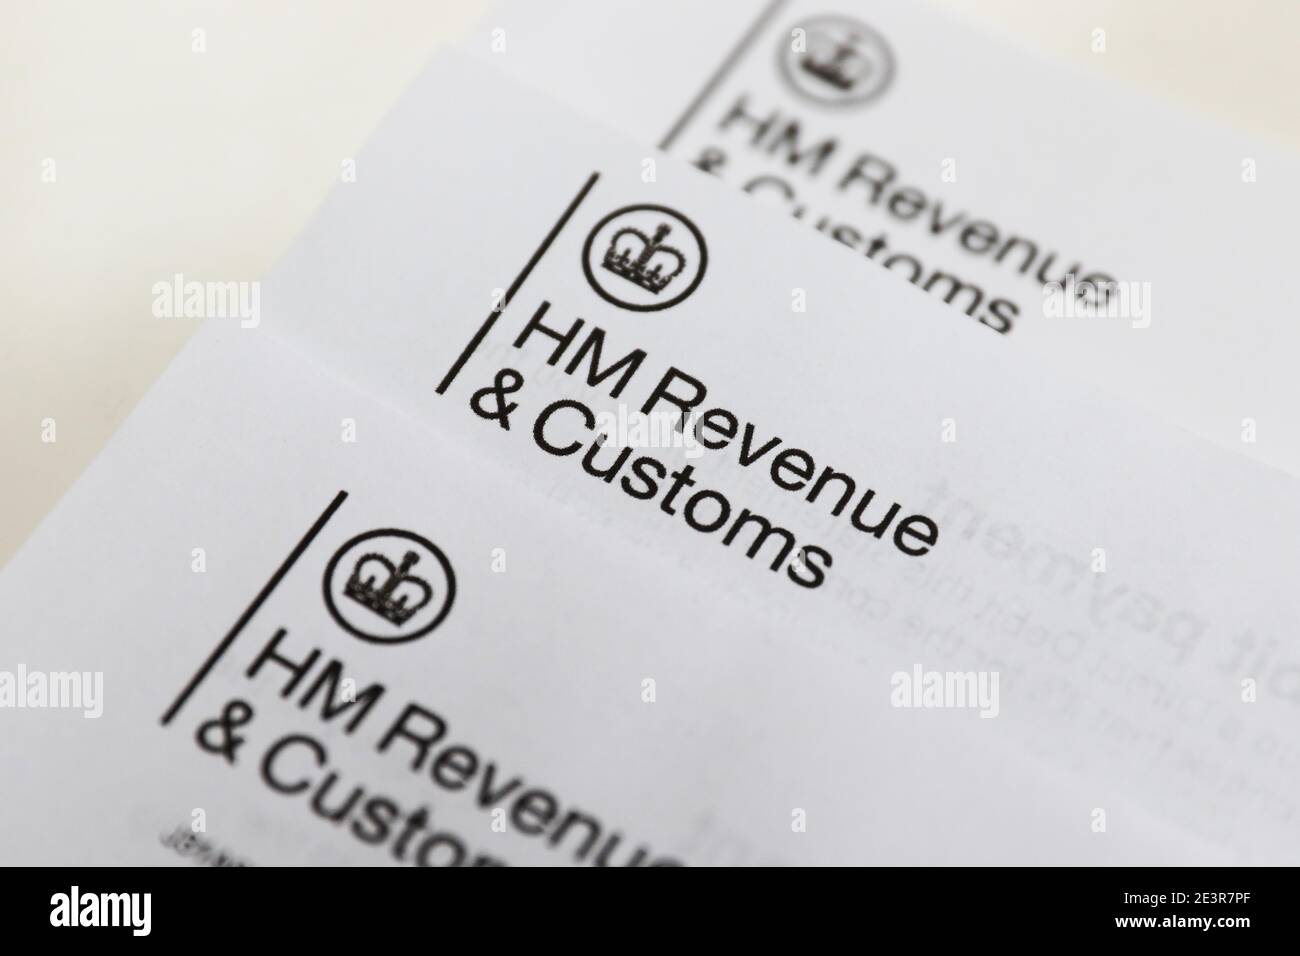 HMRC HM Revenue & Customs Self Assessment Statement  Picture by Antony Thompson - Thousand Word Media, NO SALES, NO SYNDICATION. Contact for more info Stock Photo